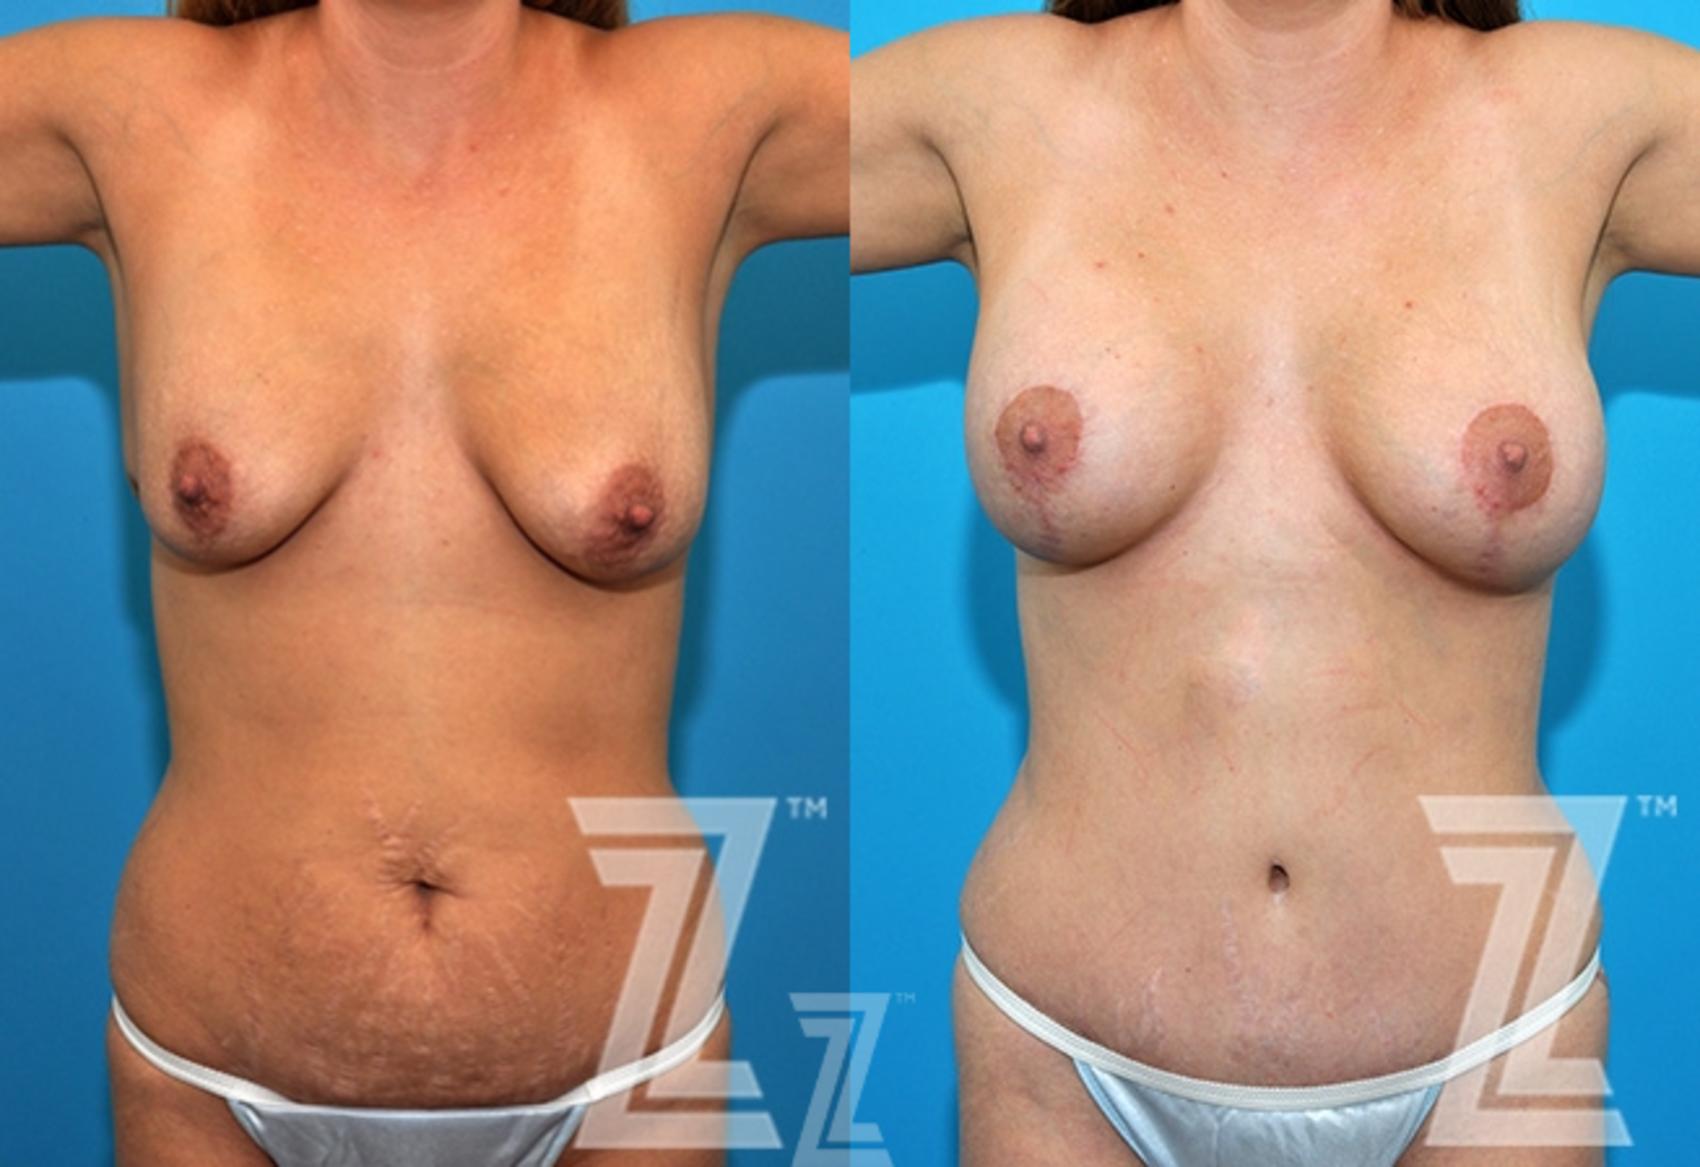 Mommy Makeover Before & After Photo | Austin, TX | The Piazza Center for Plastic Surgery & Advanced Skin Care